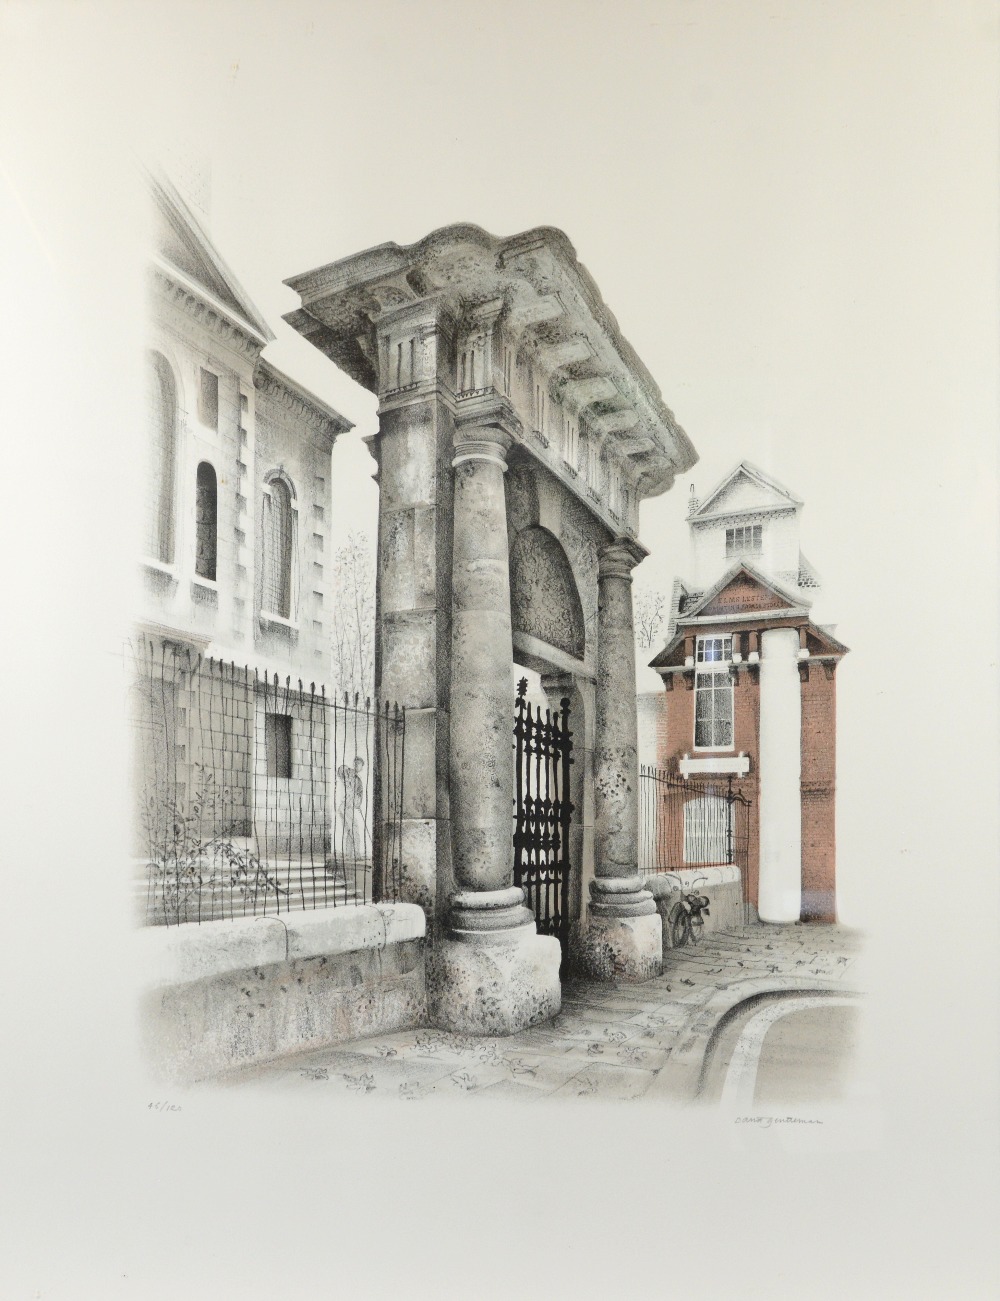 David Gentleman, Covent Garden Prospects series: 'St Giles-in-the-Fields Lichgate', lithographic - Image 2 of 7